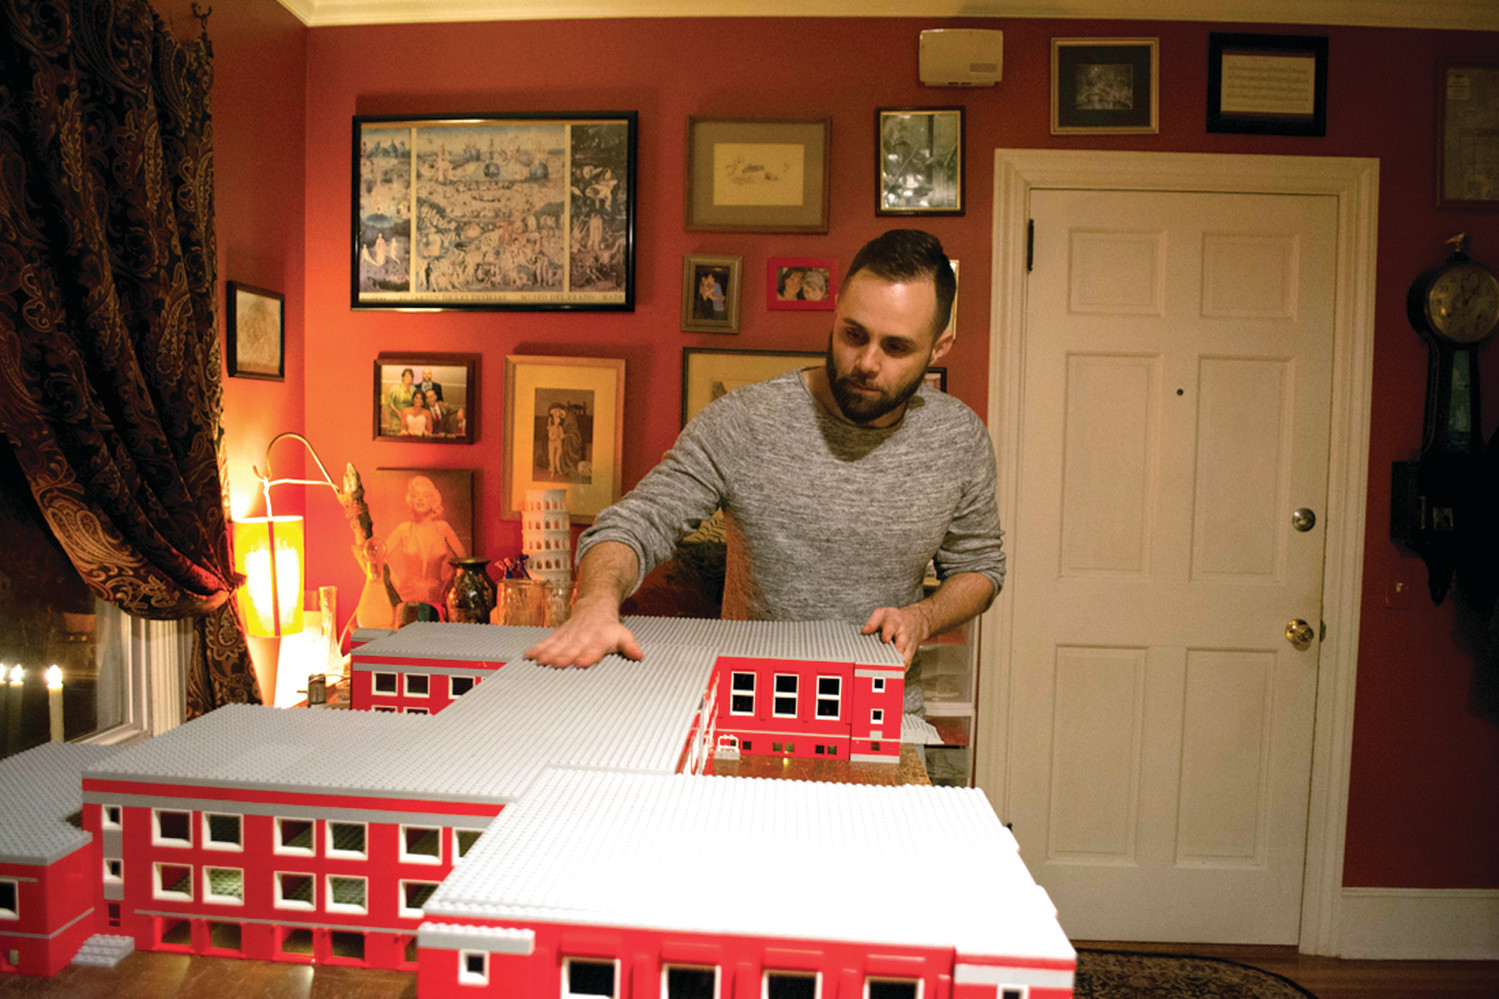 LESSON PLAN: Grover discusses the process behind building a model of Gorton Junior High School. As his second model, he was more confident in his process and knew how to construct more efficiently.